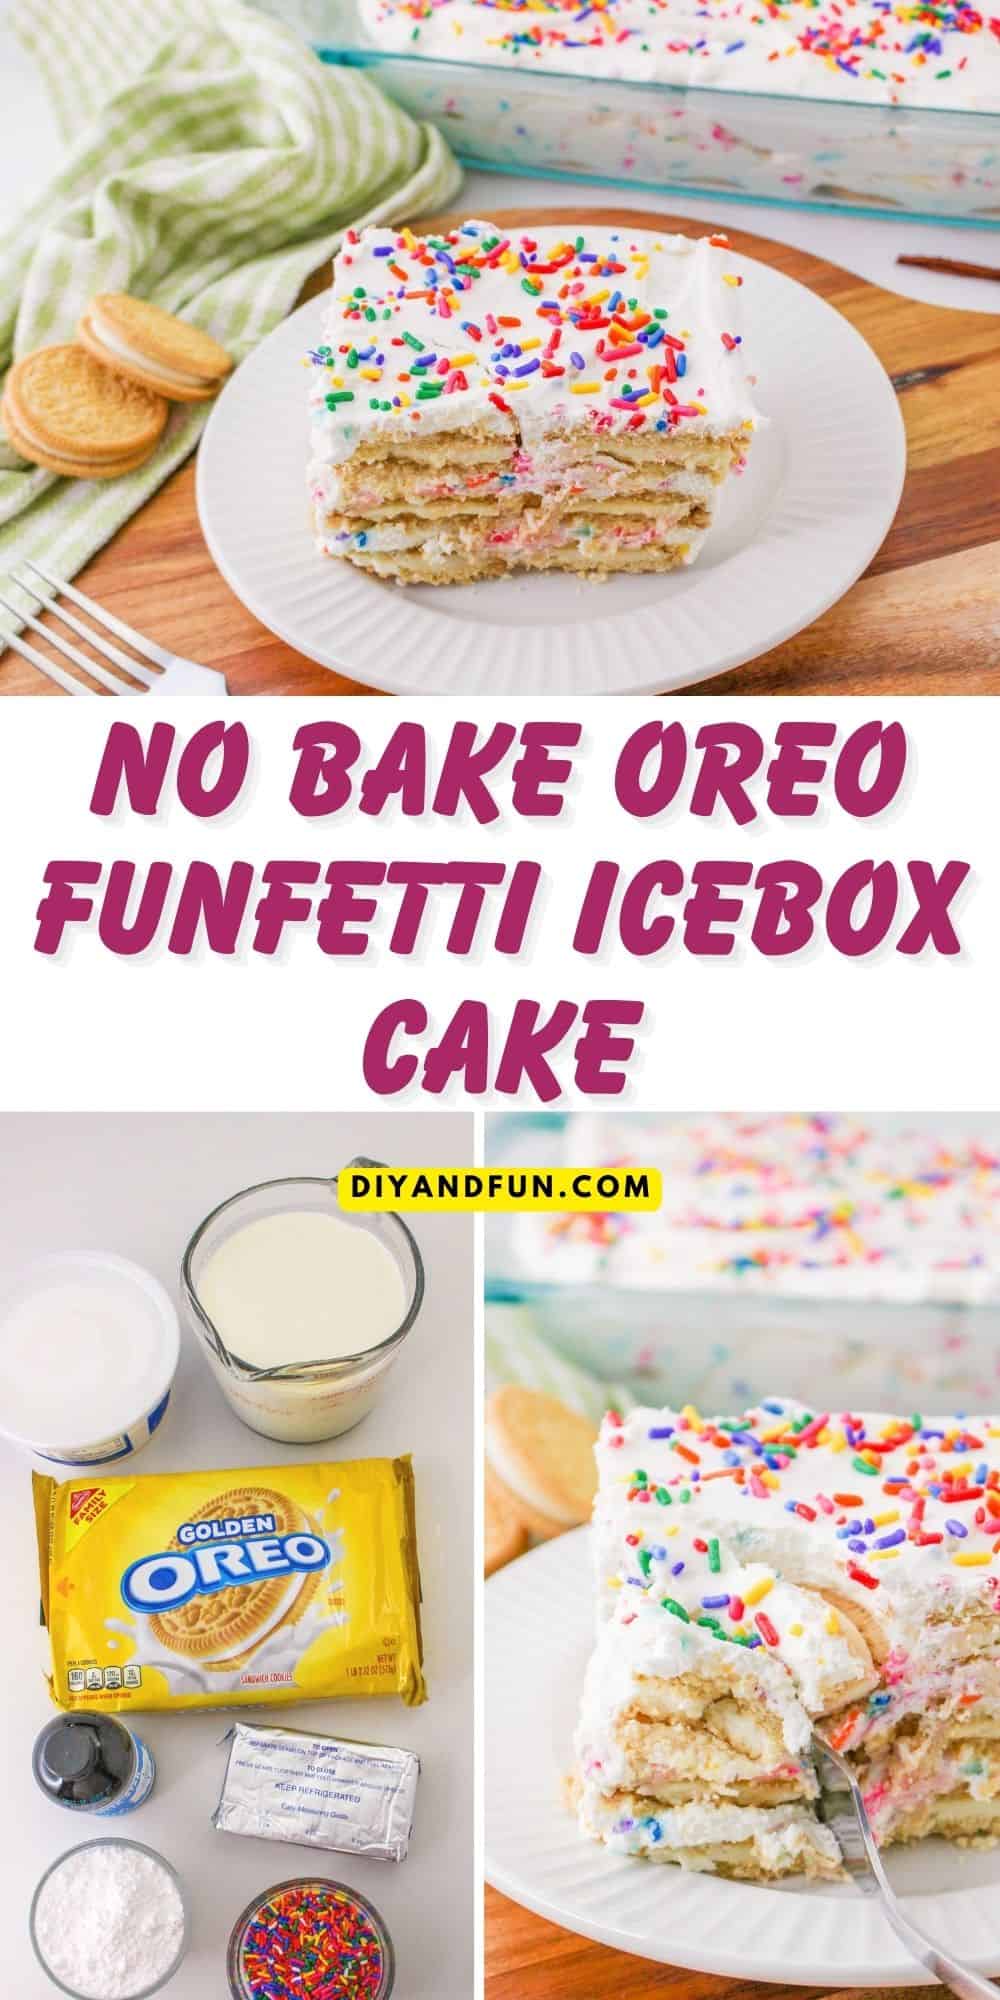 No Bake Oreo Funfetti Icebox Cake, a simple and delicious layered cake dessert that can be made in under 20 minutes.